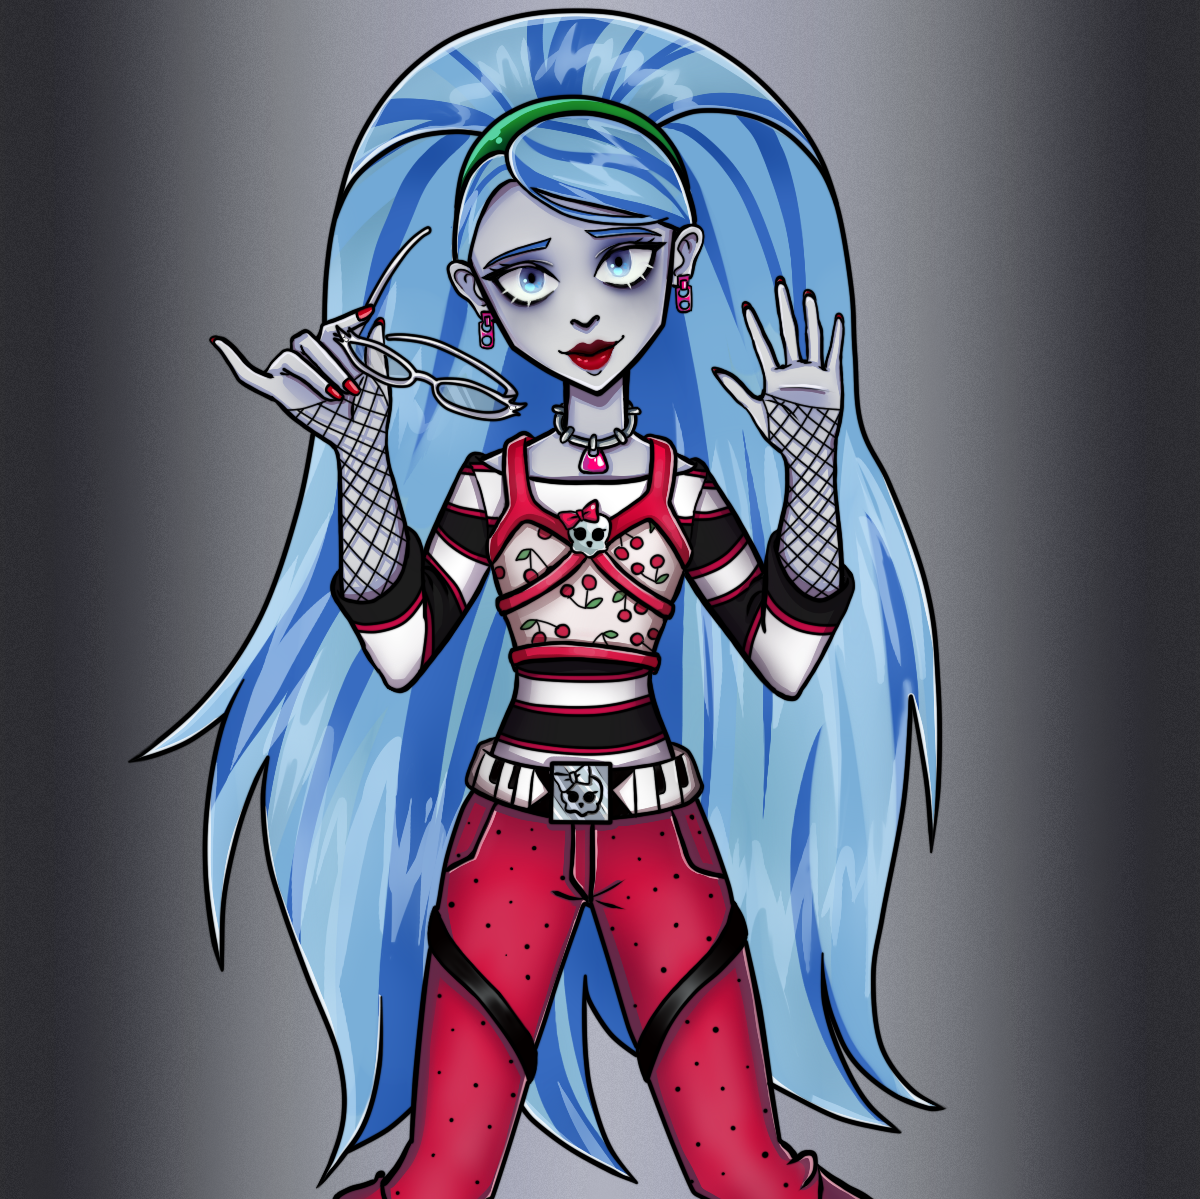 Ghoulia Yelps costume